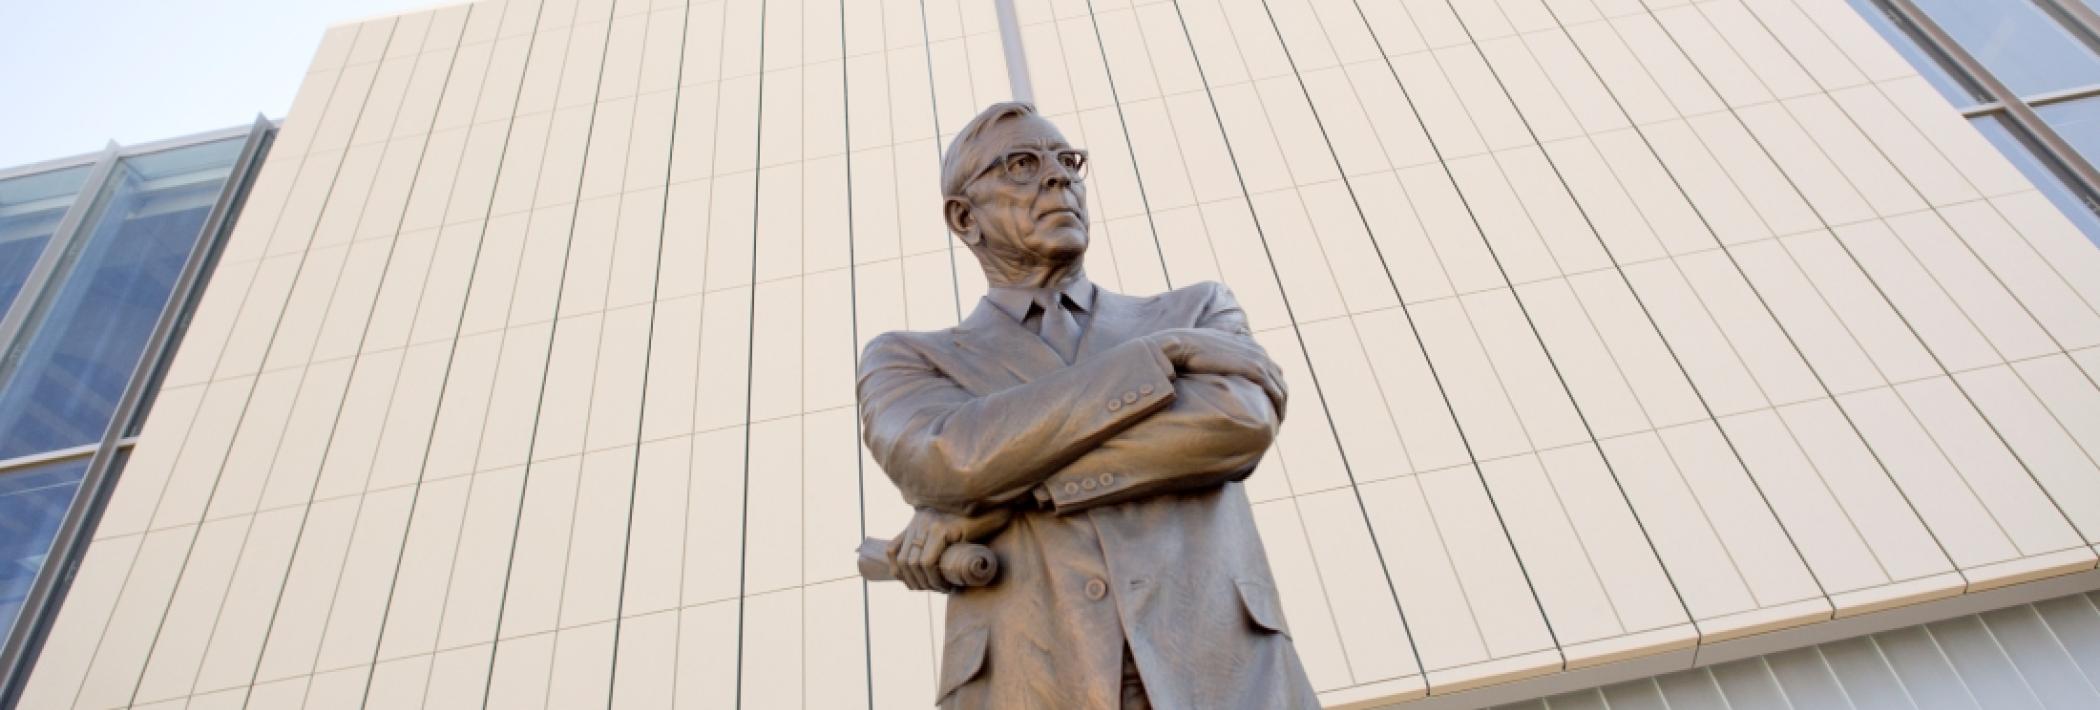 Jon Wooden Statue representing Vision and principles